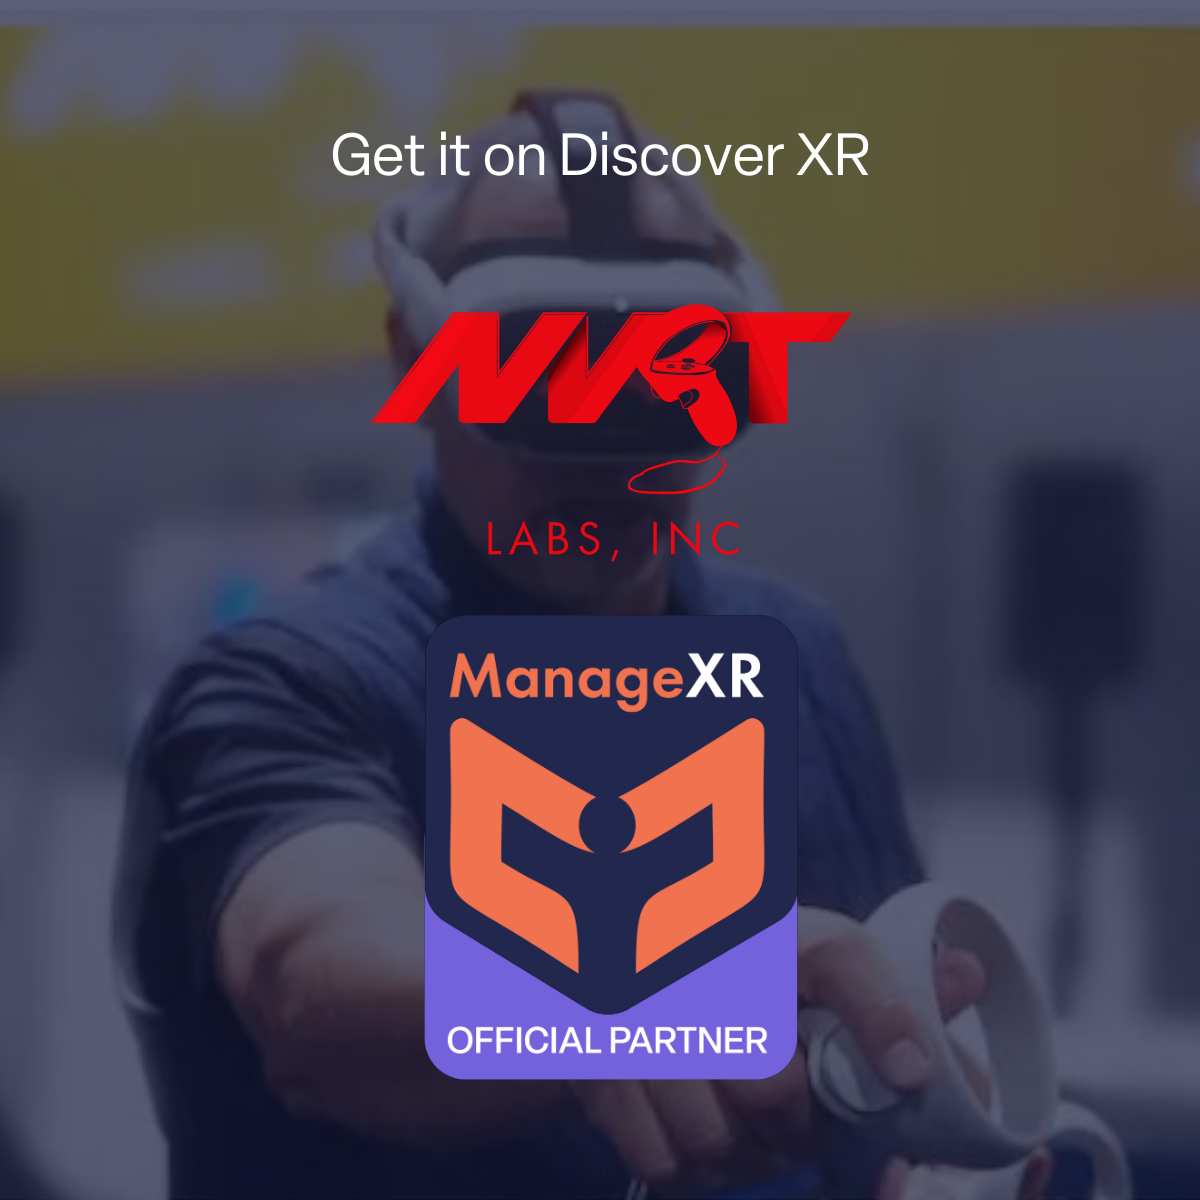 NVRT Partners with ManageXR to become an Official Content Provider